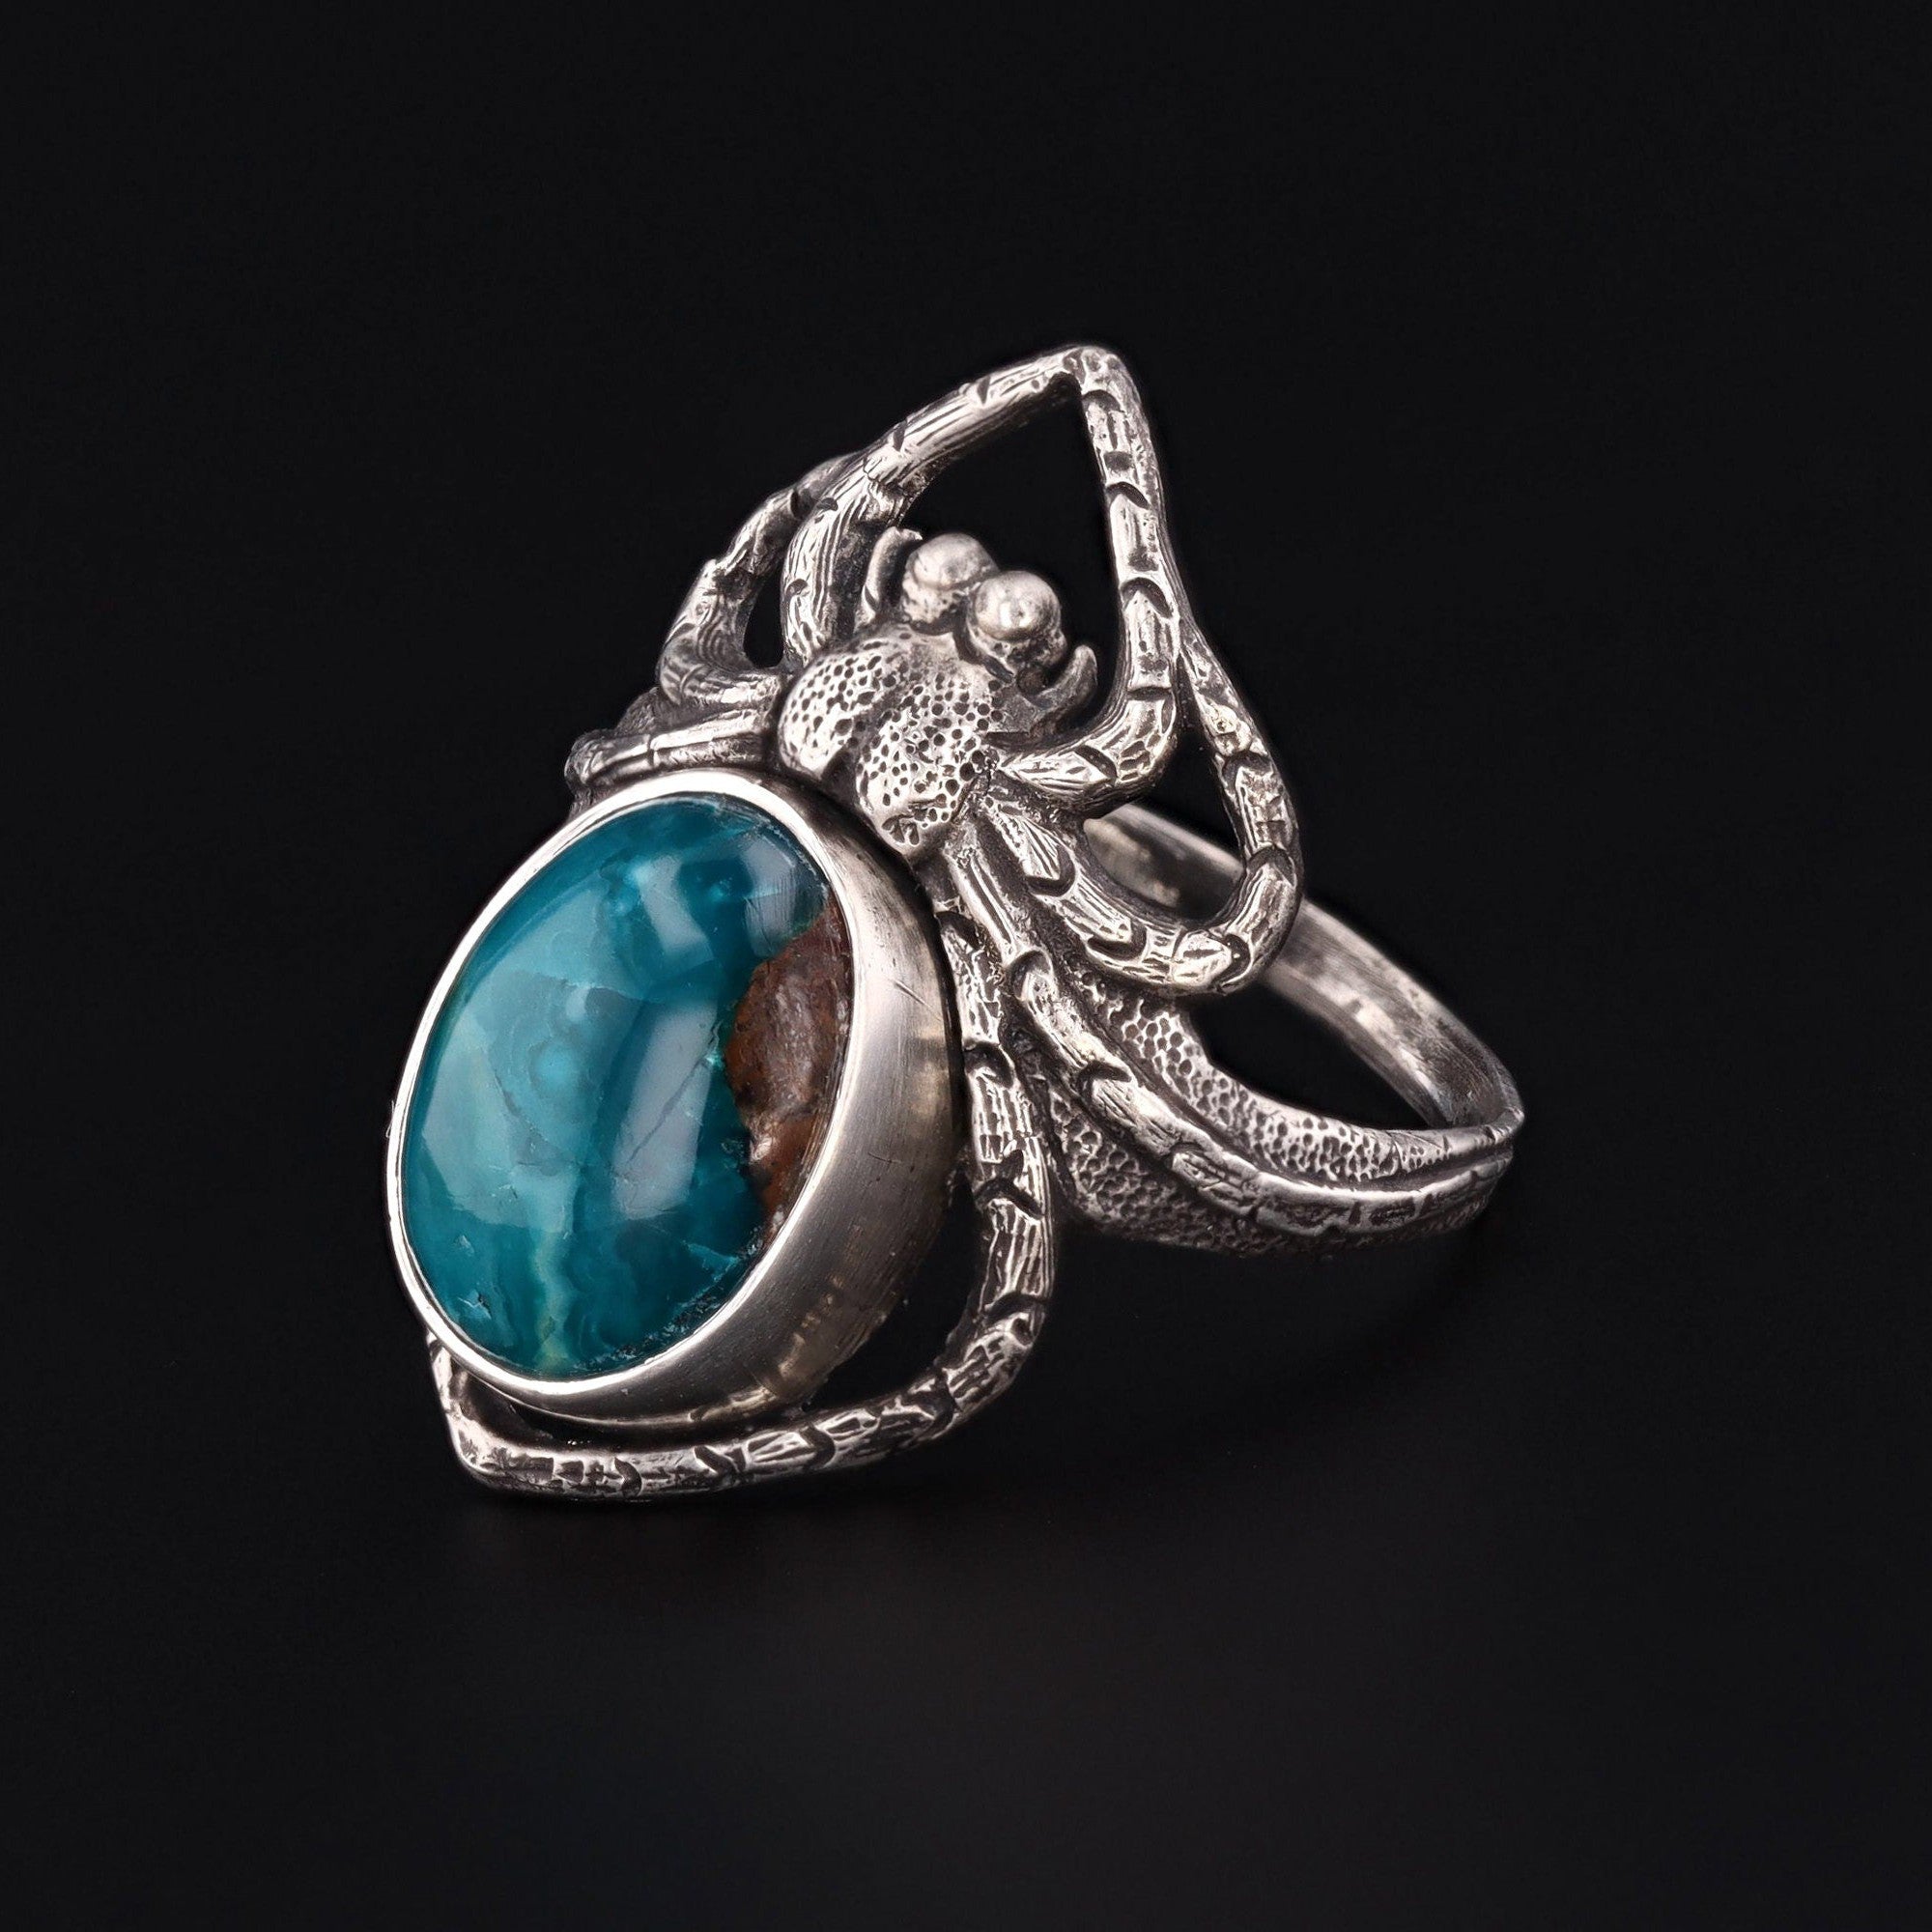 Art Nouveau Style Reproduction Silver and Chrysocolla Spider Ring of Sterling Silver